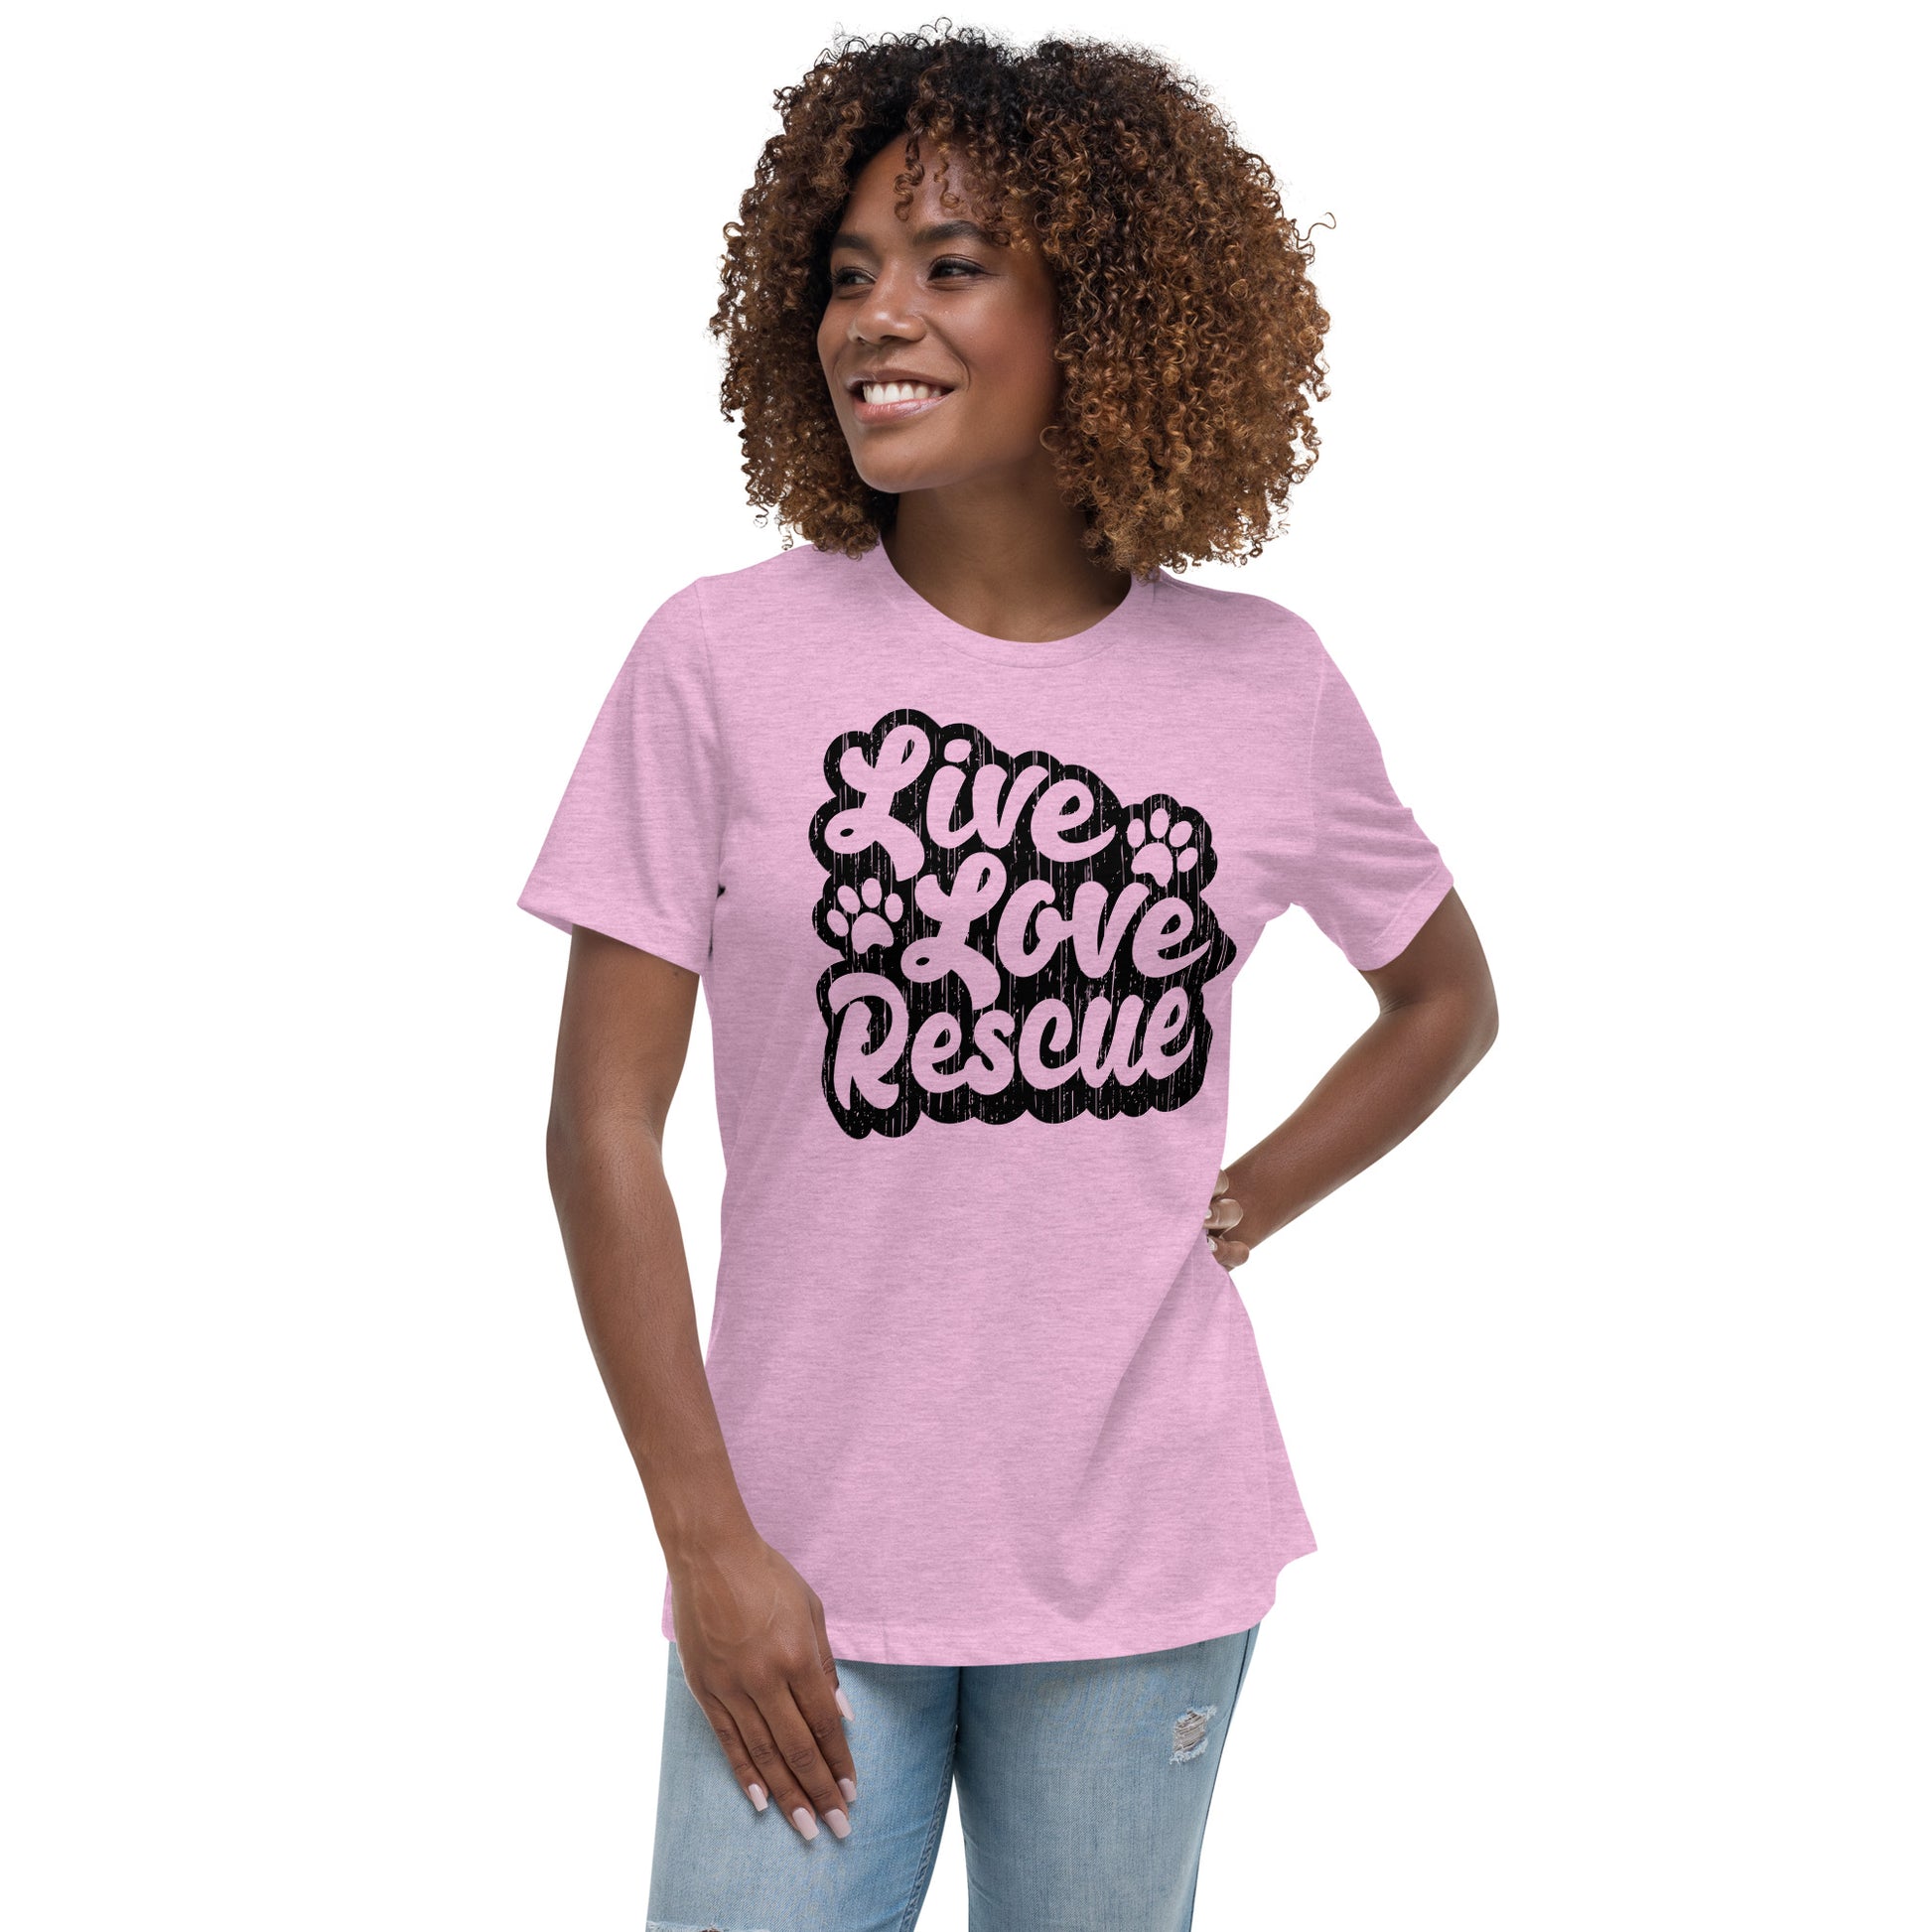 Live love rescue retro women’s relaxed fit t-shirts by Dog Artistry heather prism lilac color